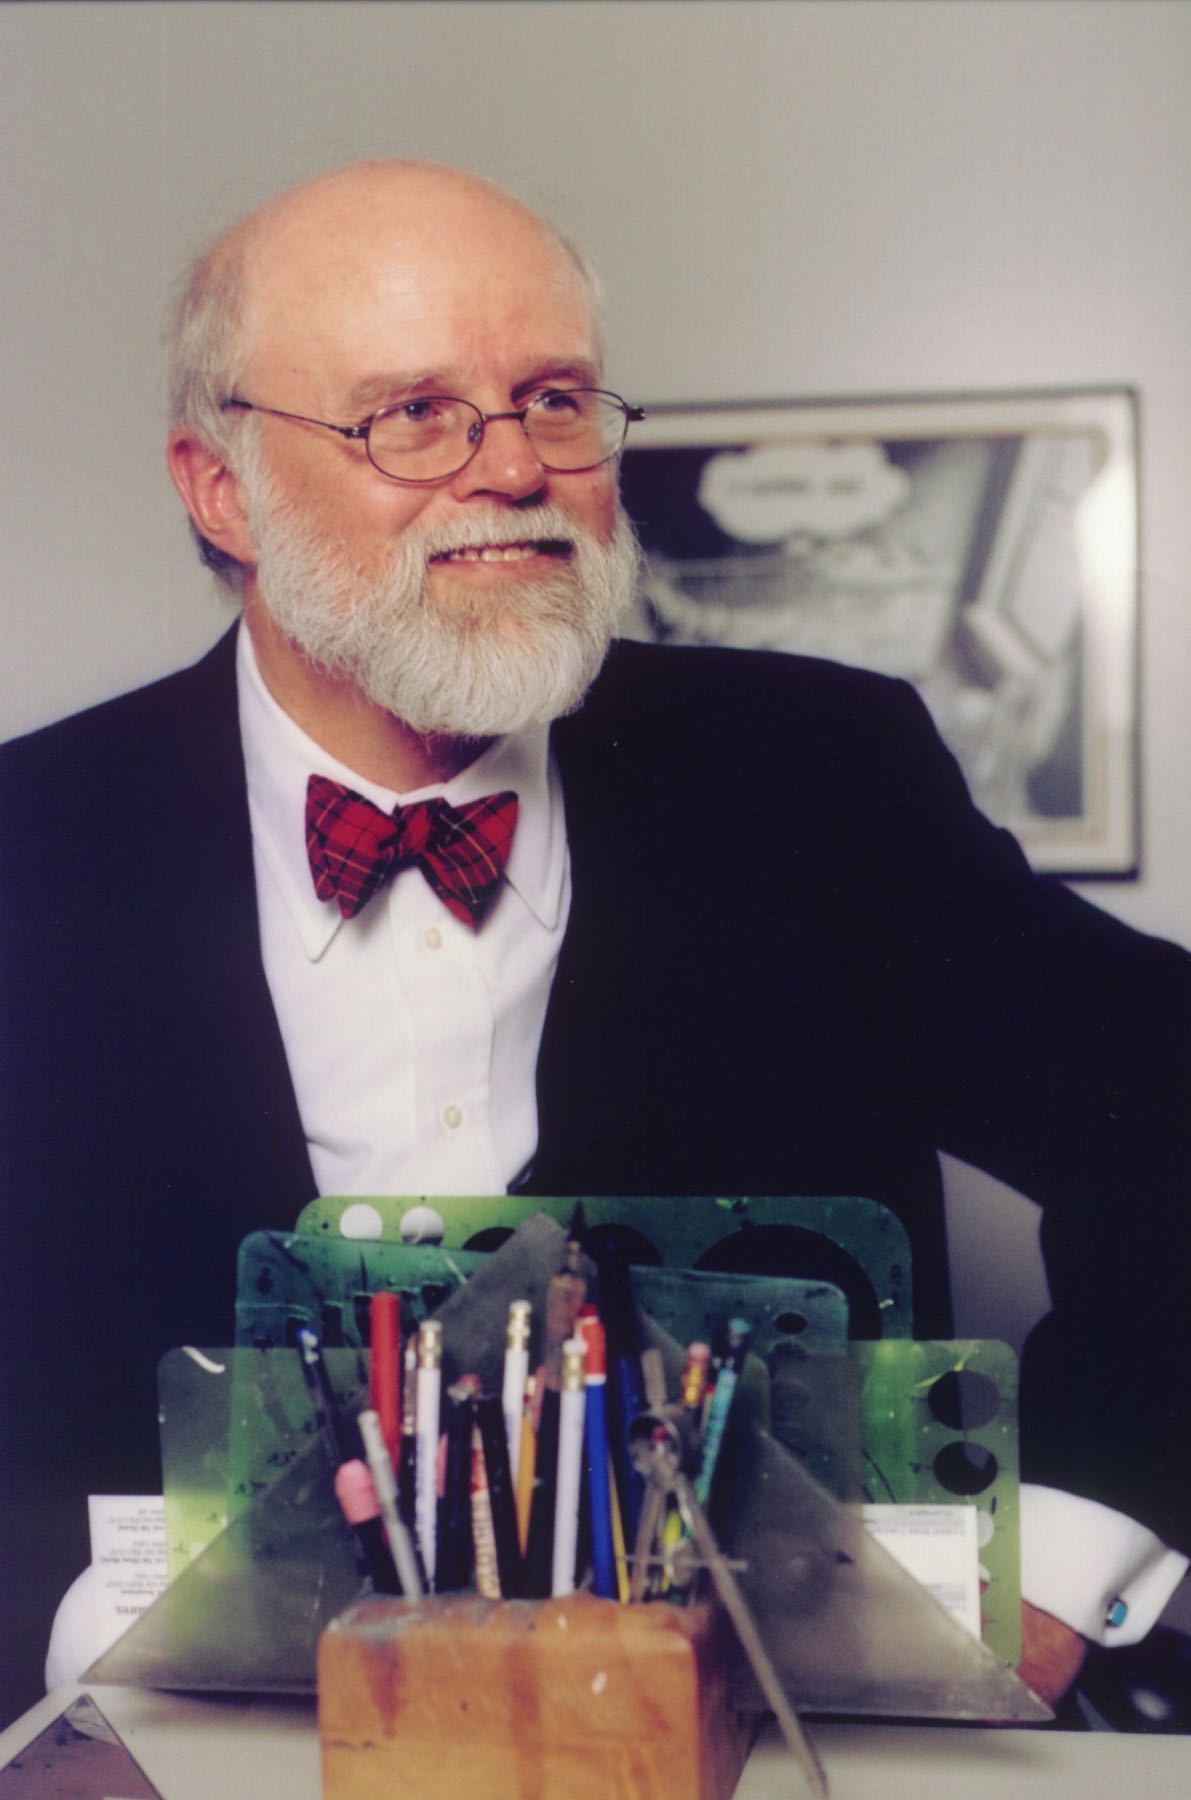 Ben Sargent, a bald, older white man with a bushy white beard is dressed in a suit and red bowtie, with his artistic tools, including pens, in front of him.